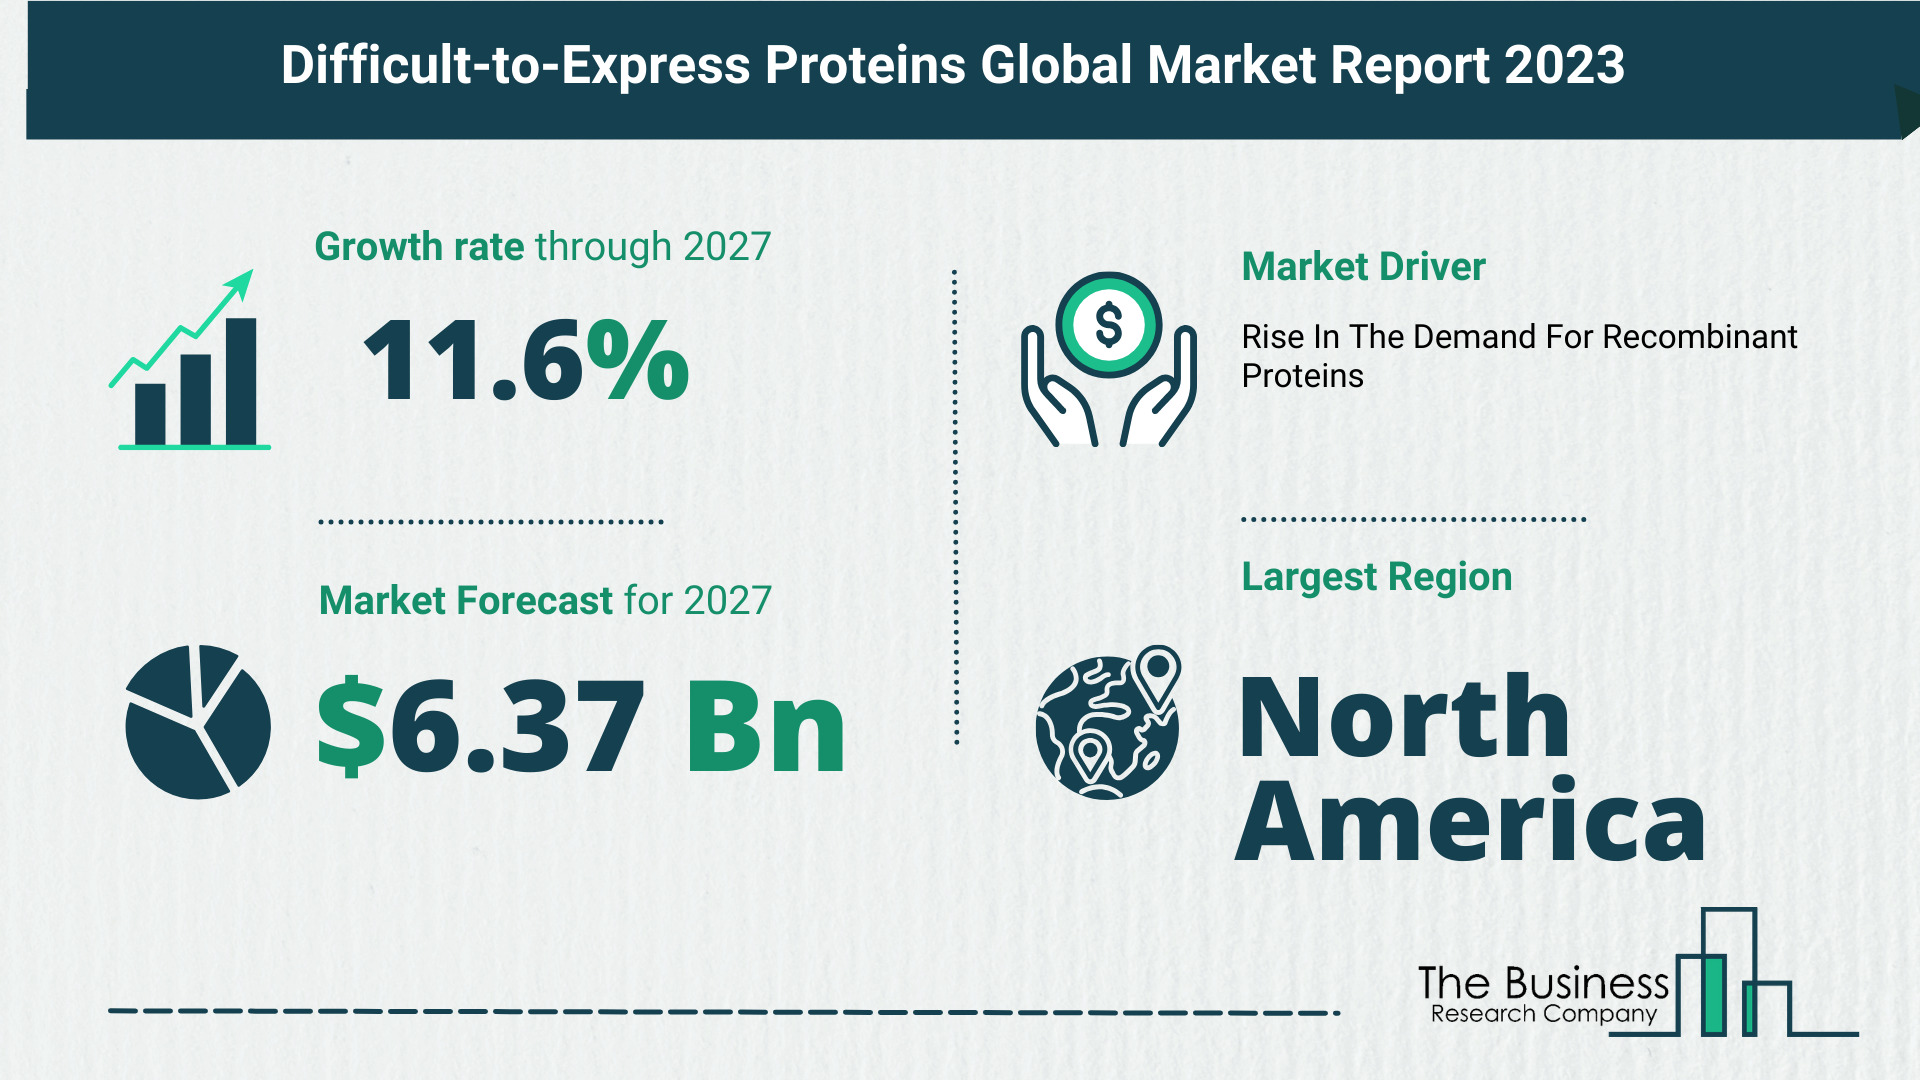 Future Growth Forecast For The Difficult-to-Express Proteins Global Market 2023-2032